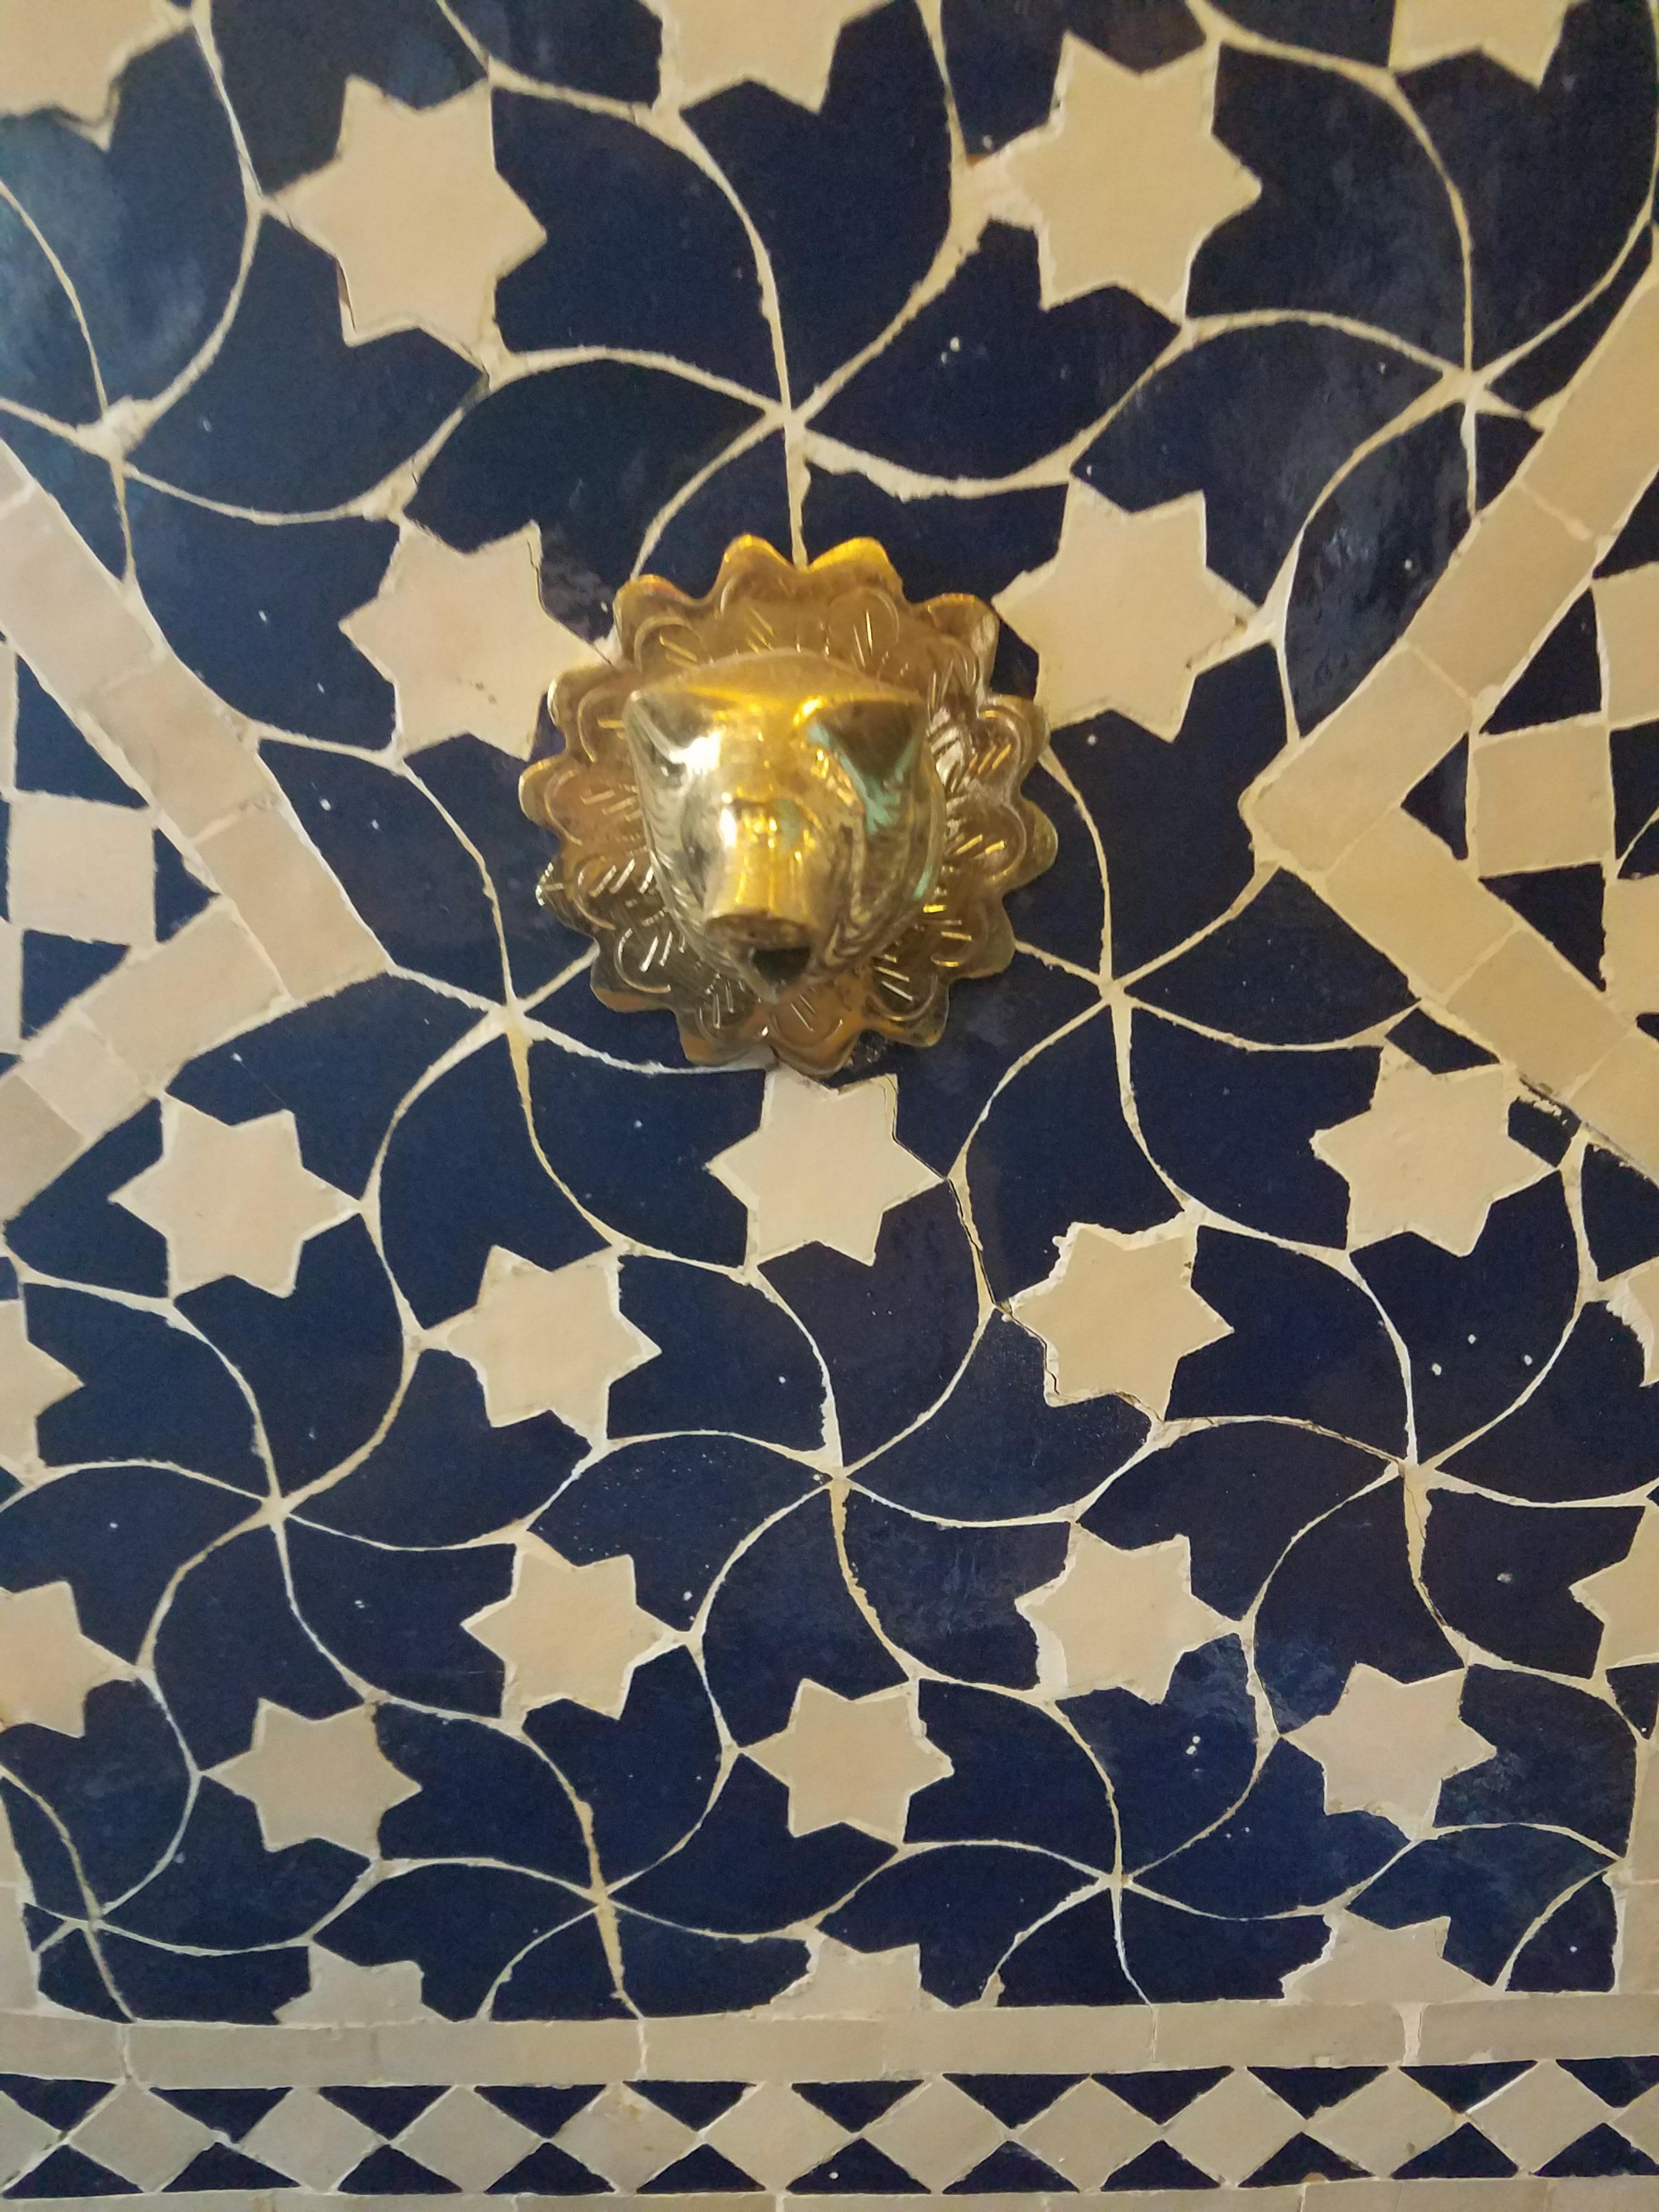 Just arrived!! Blue and white Rafraf style handmade Moroccan mosaic tile fountain made in Marrakech, Morocco. This amazing fountain measures approximately 49